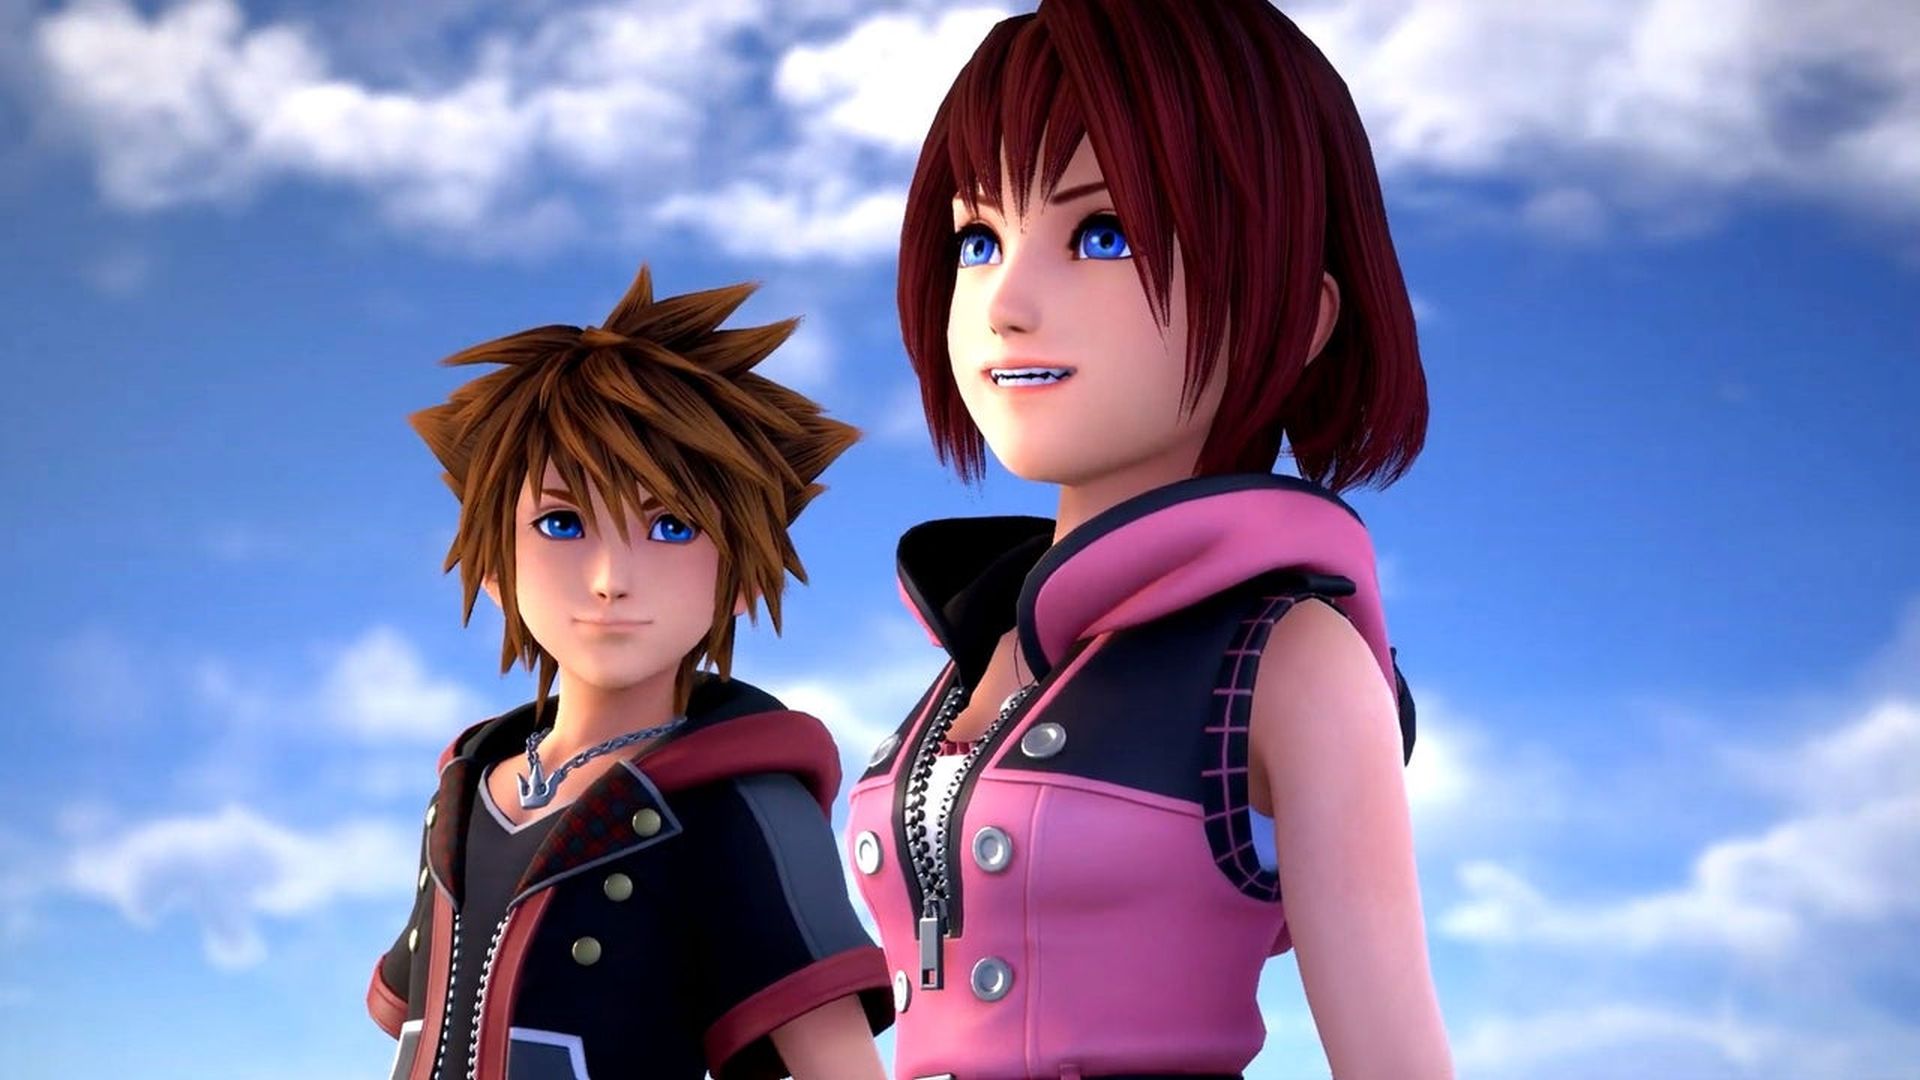 Kingdom Hearts 3: ReMind - Limit Cut Episode, Playable Characters, and More...